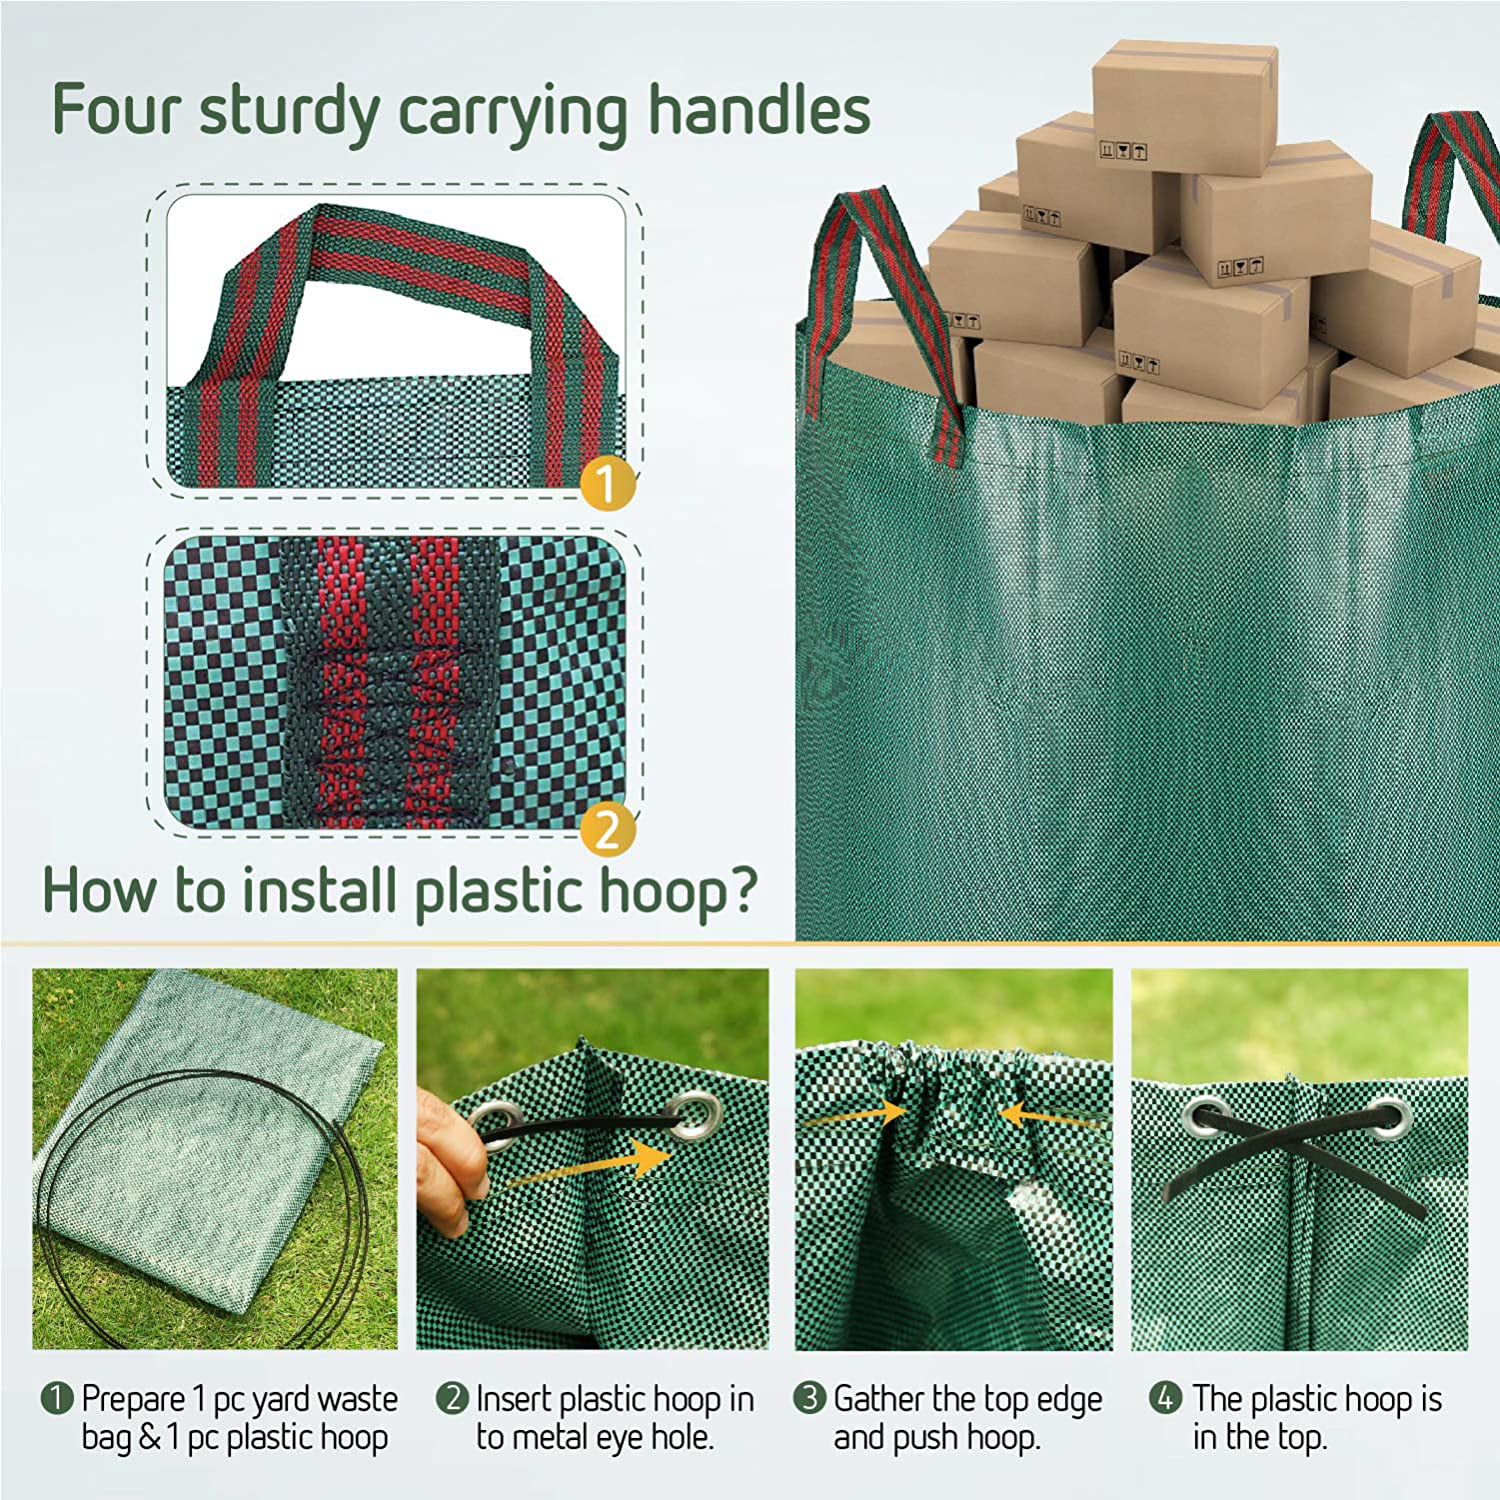 Reusable Leaf Bags, 80 Gallons Lawn Bags, Yard Waste Bags Heavy